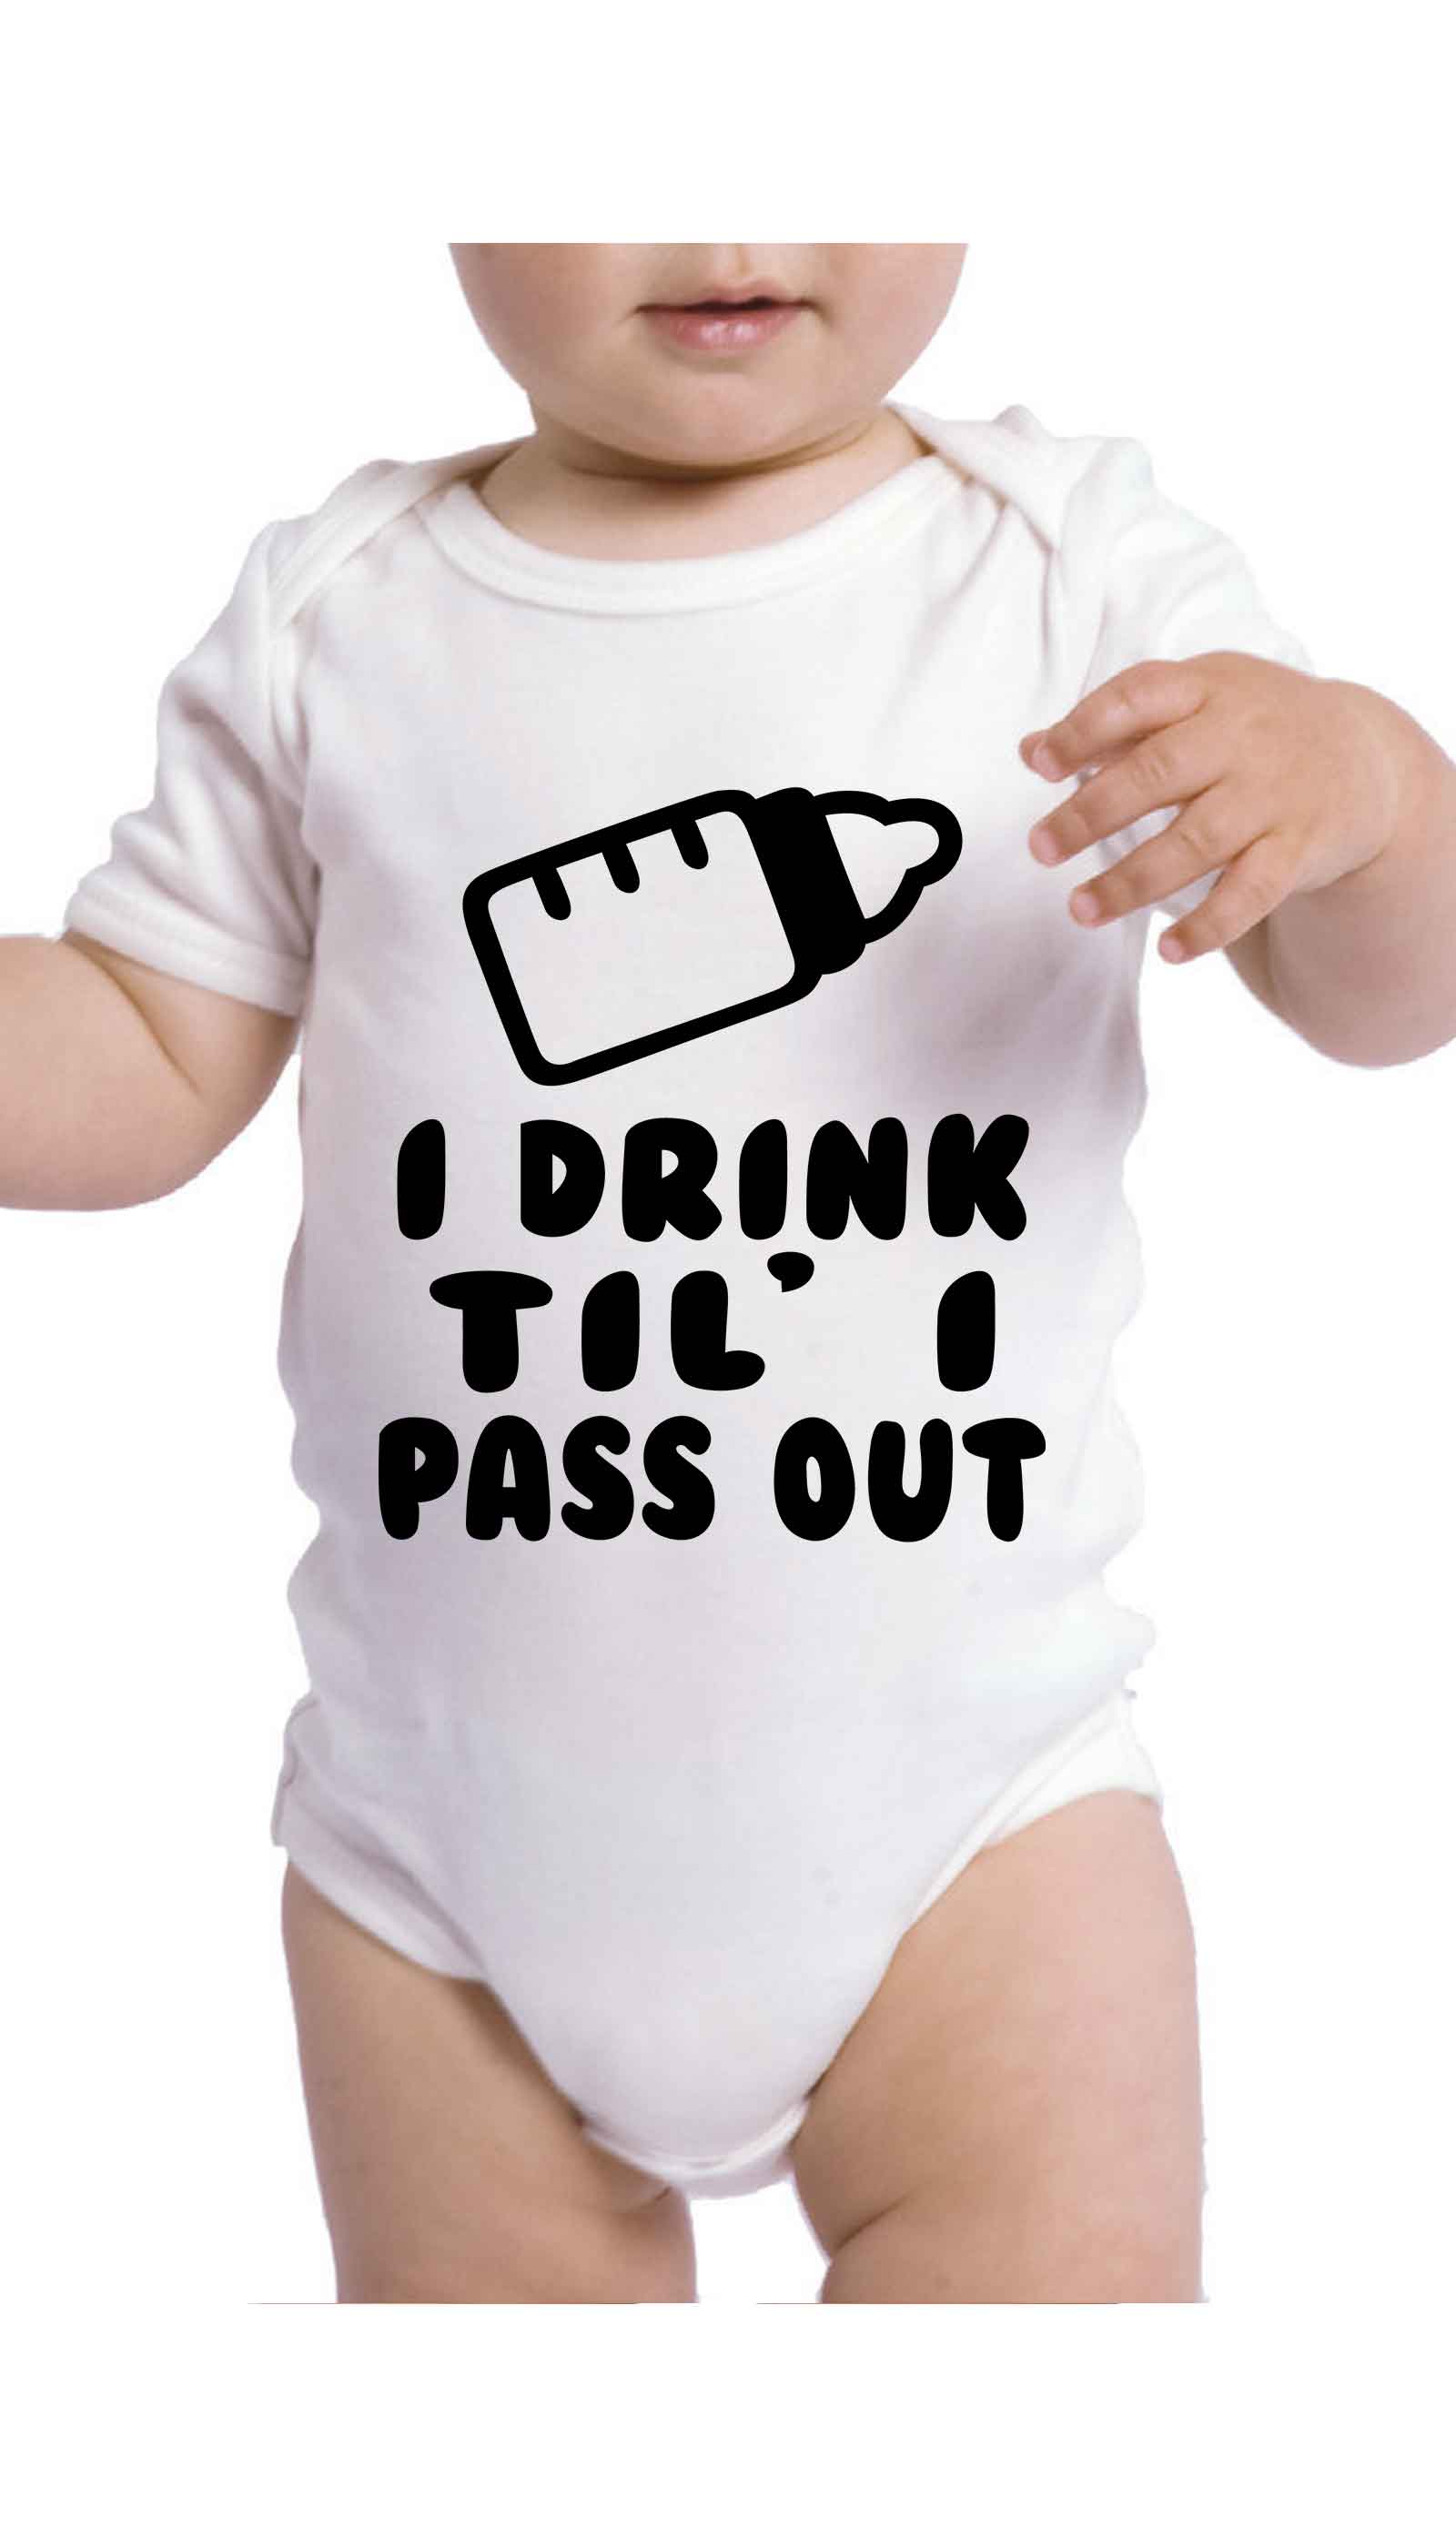 I Drink Til' I Pass Out Cute & Funny Baby Infant Onesie | Sarcastic ME